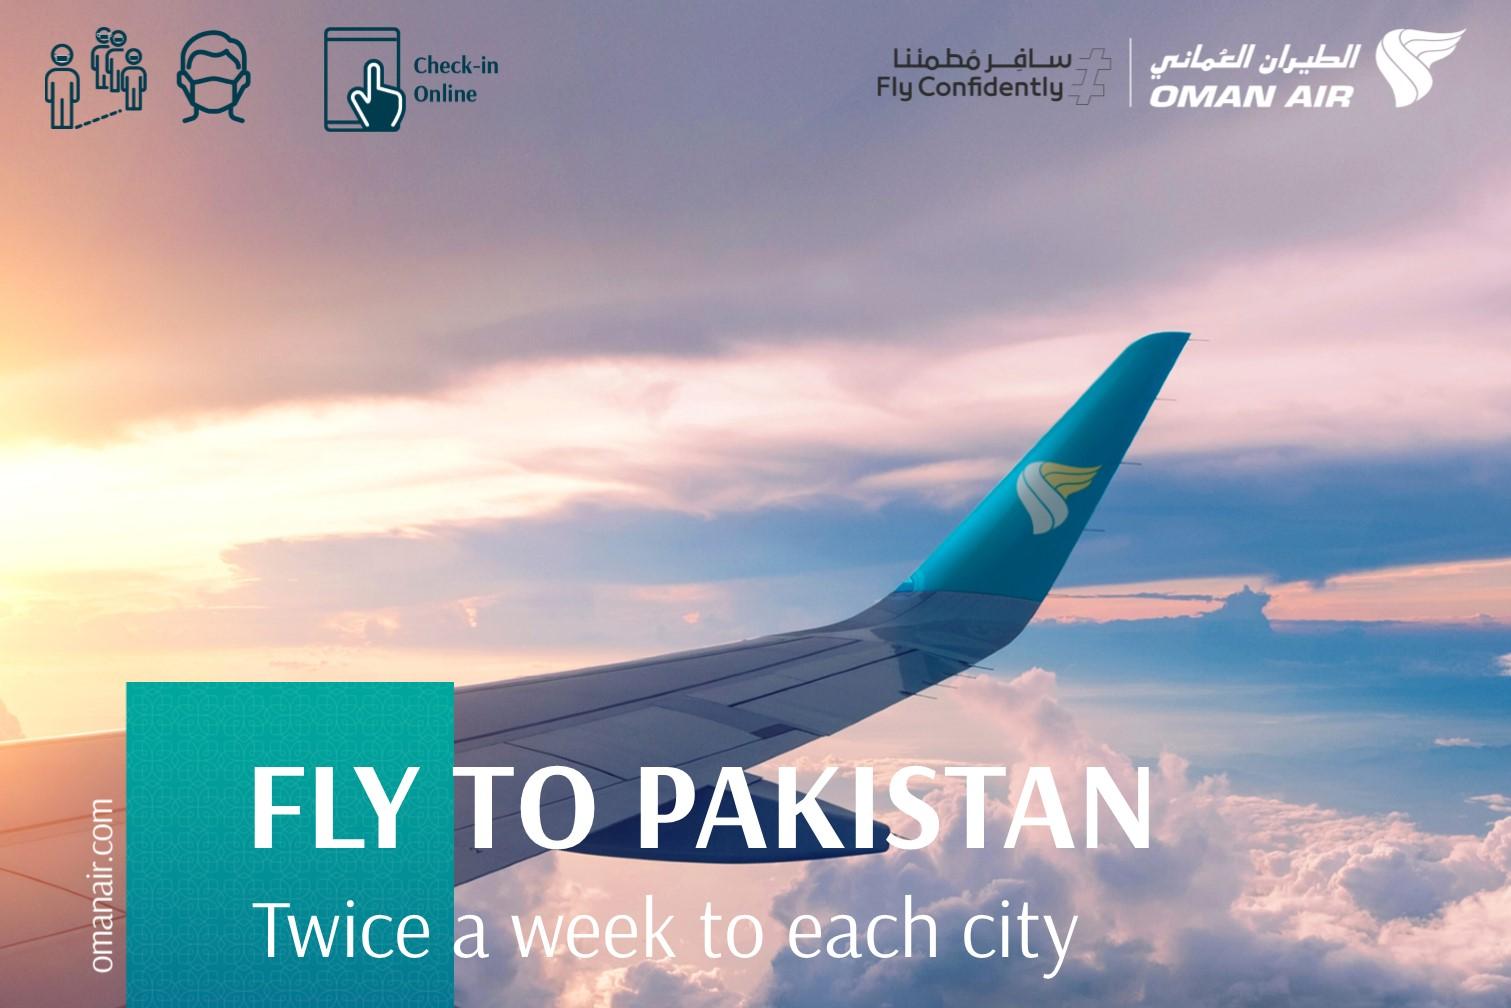 Oman Air press release fly to Pakistan